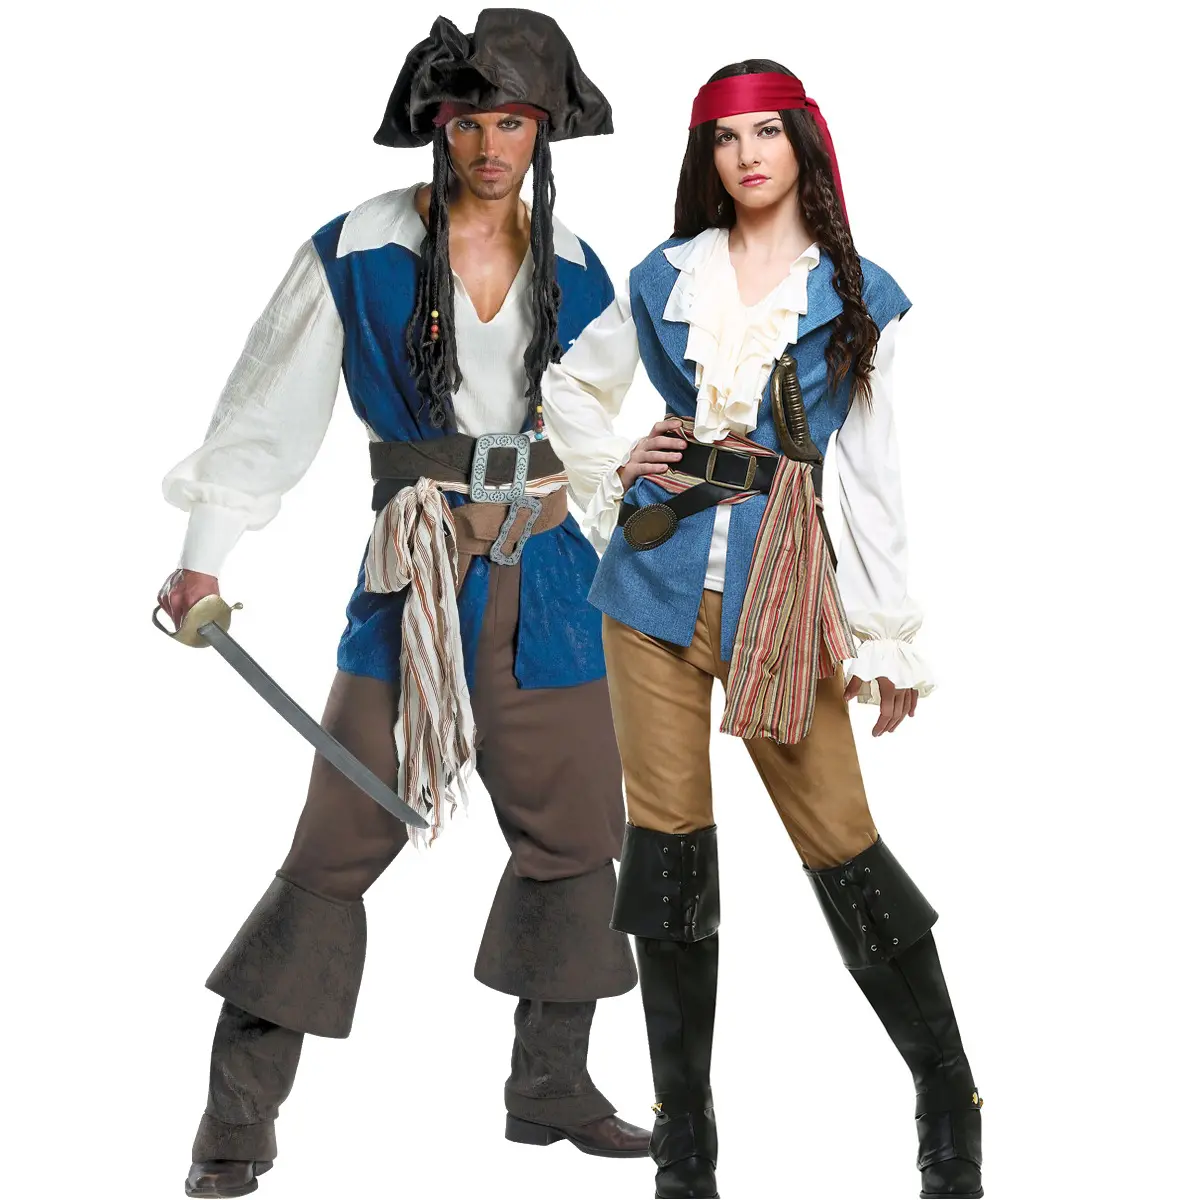 Captain Pirate Costumes for Women Men Adult Halloween Captain Jack Sparrow Costume Pirates of the Caribbean Cosplay Clothes Set